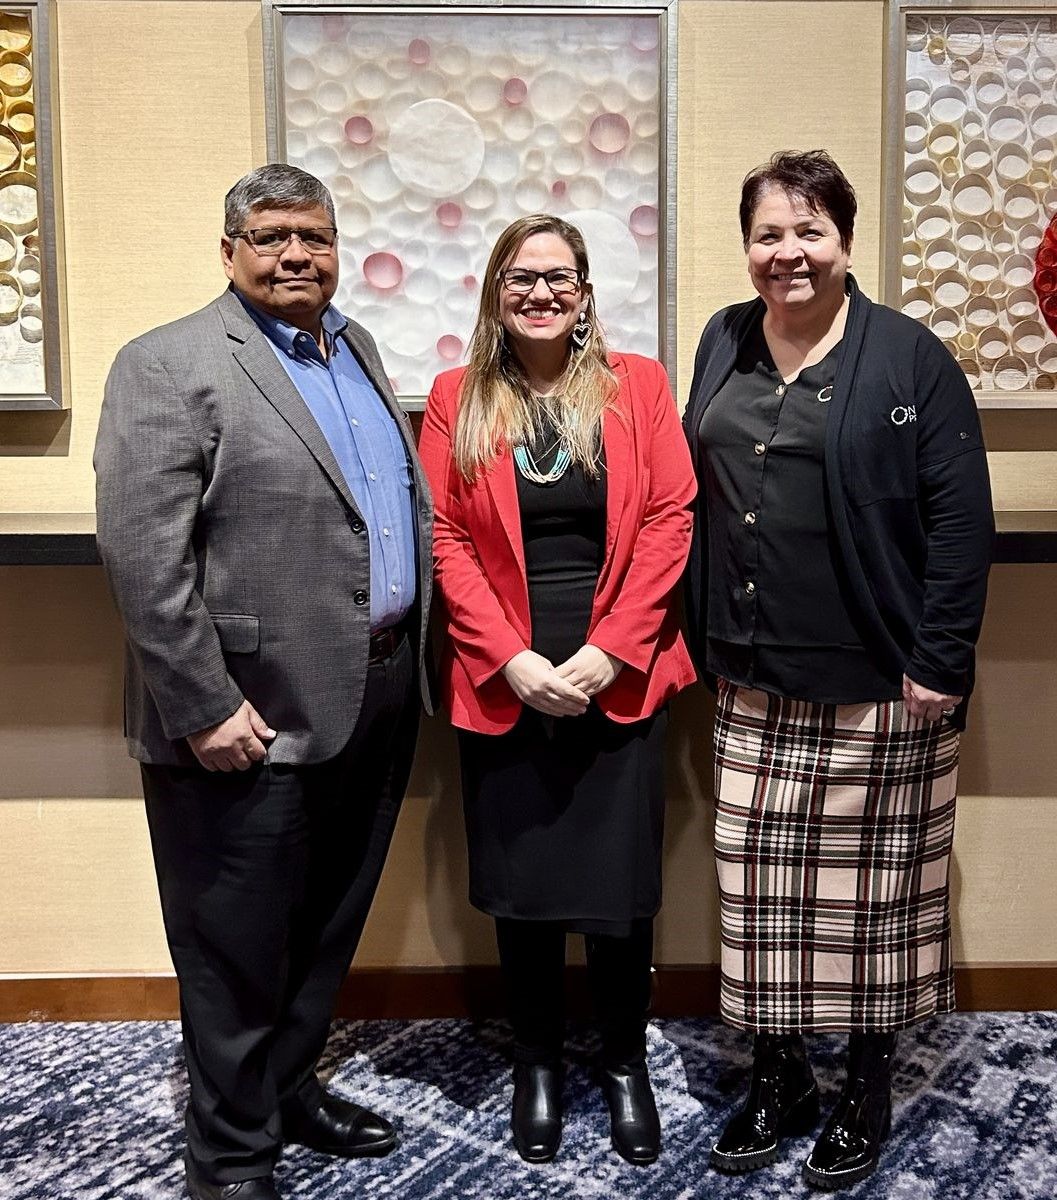 NCUIH President-elect Walter Murillo (Choctaw), CEO Francys Crevier (Algonquin), and NCUIH board member Maureen Rosette (Chippewa Cree)